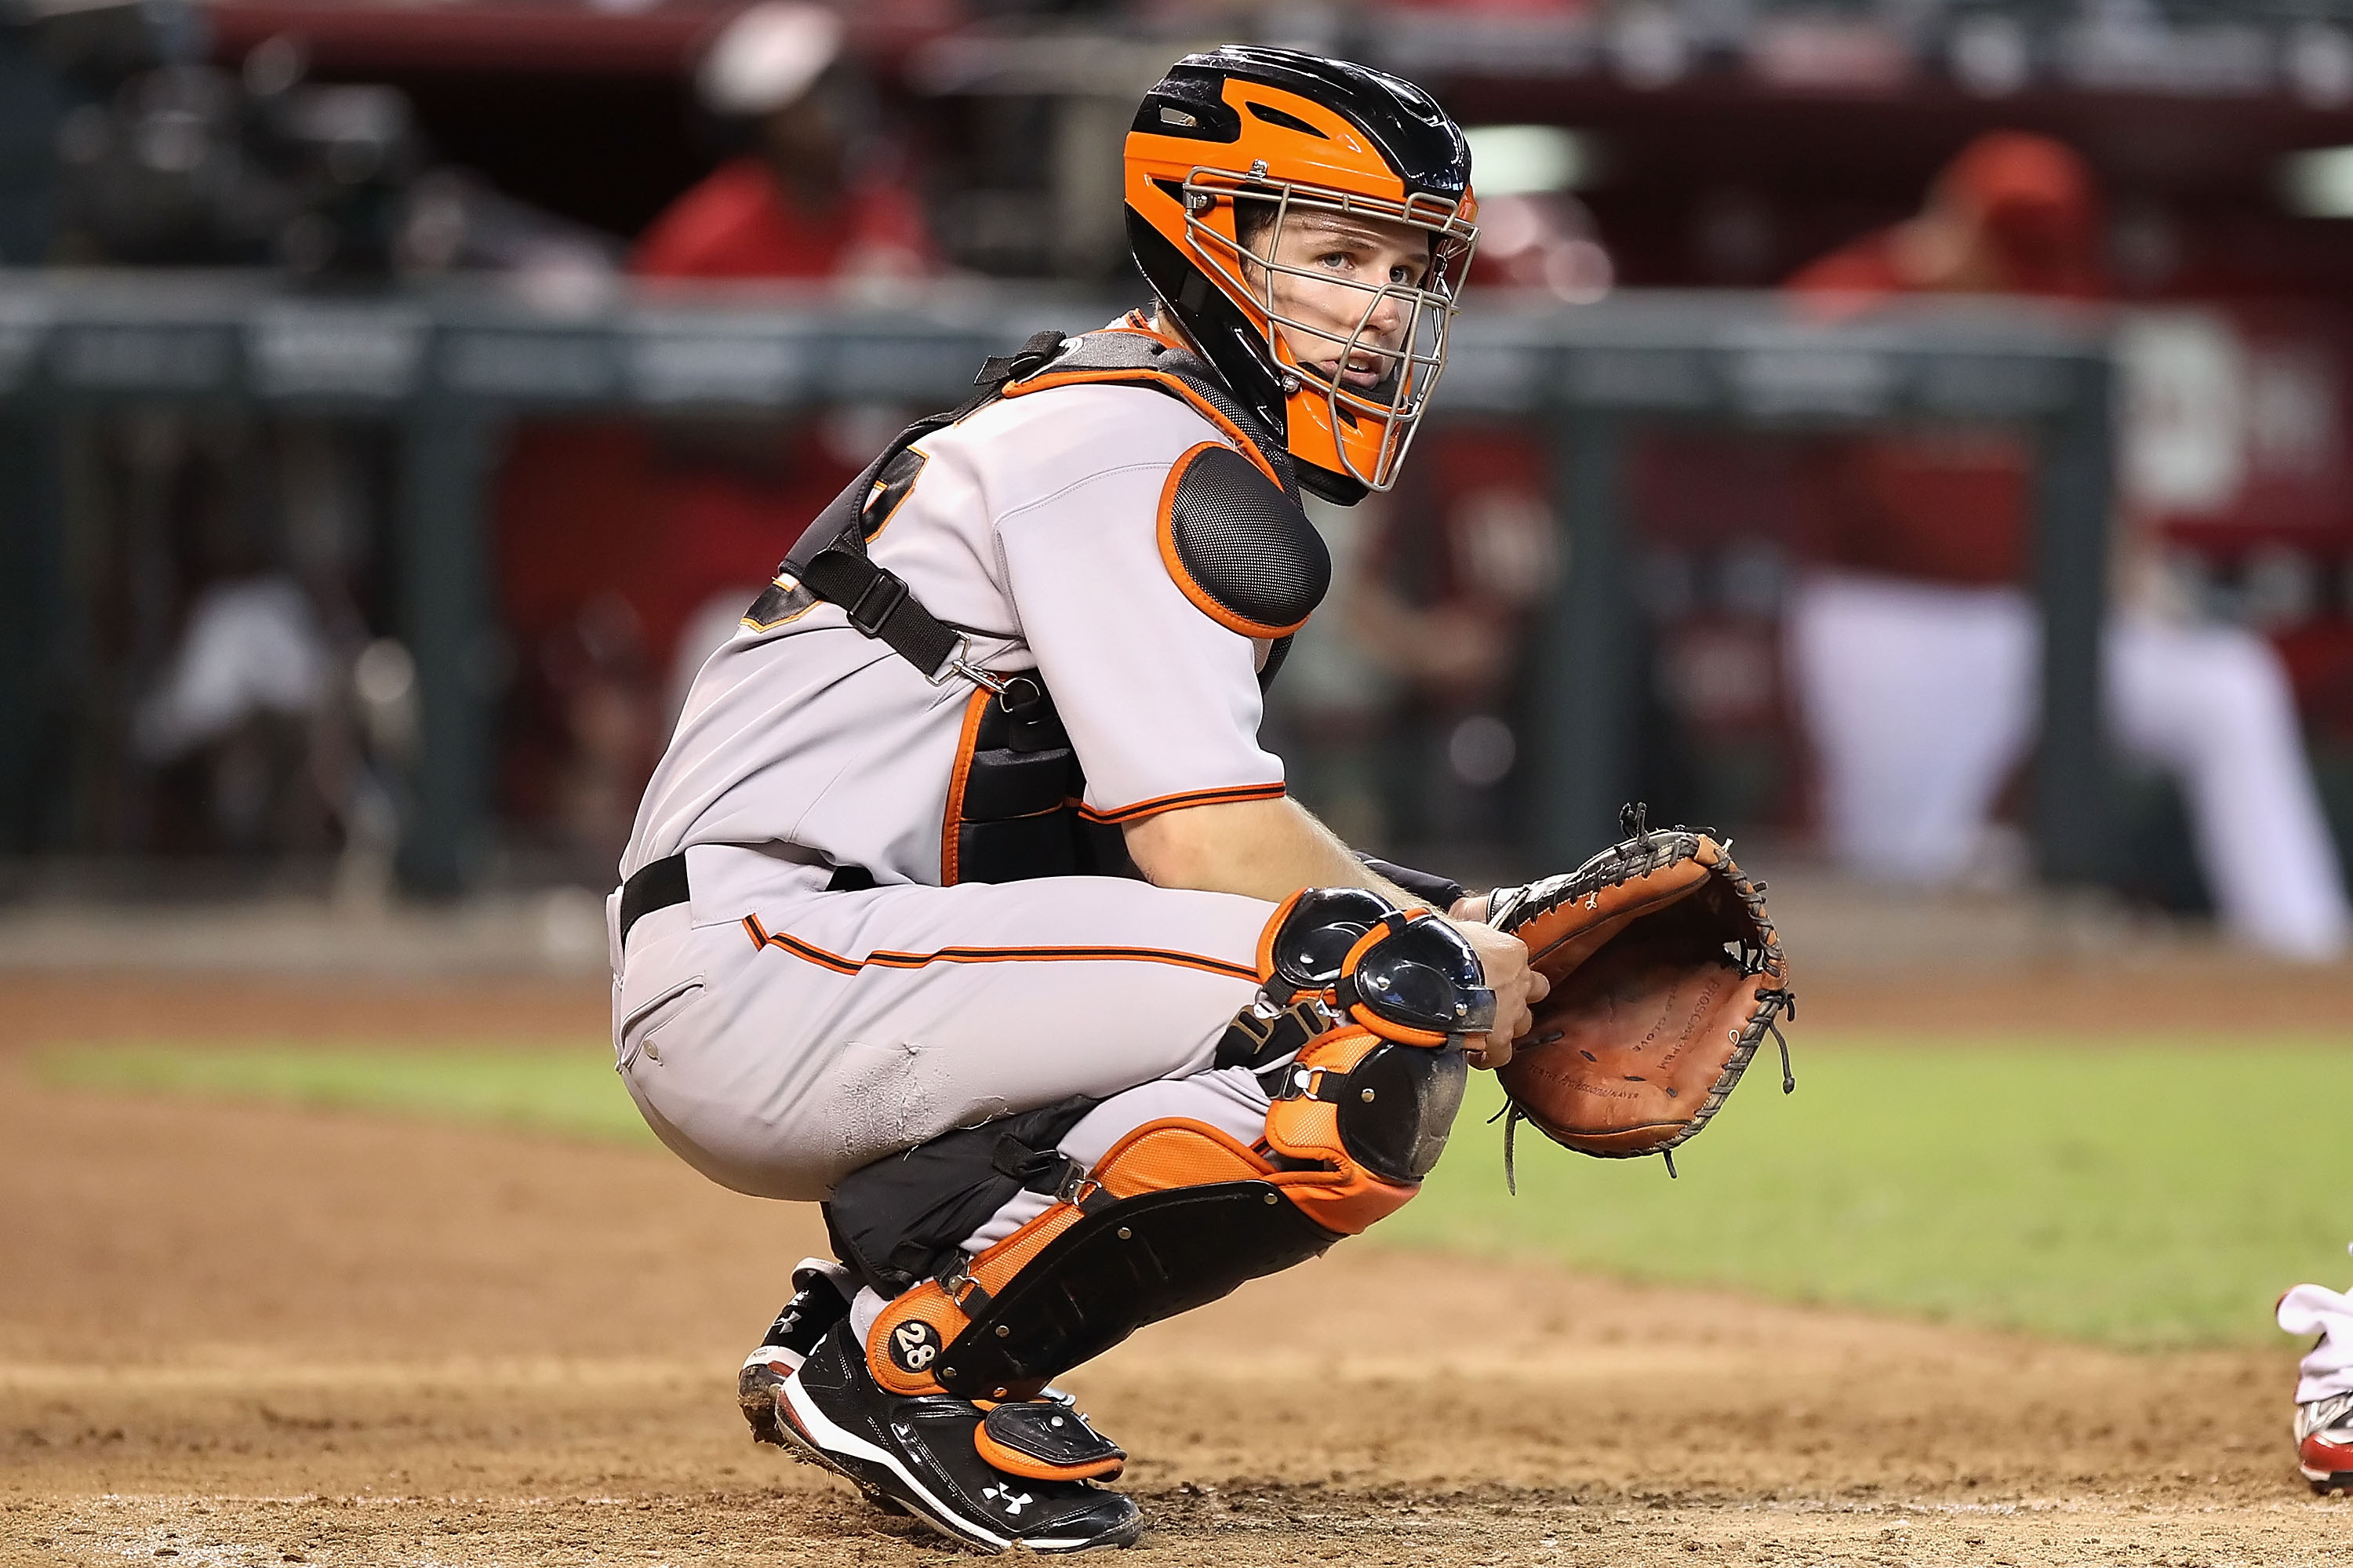 MLB Power Rankings: Best Catchers 25 and Under